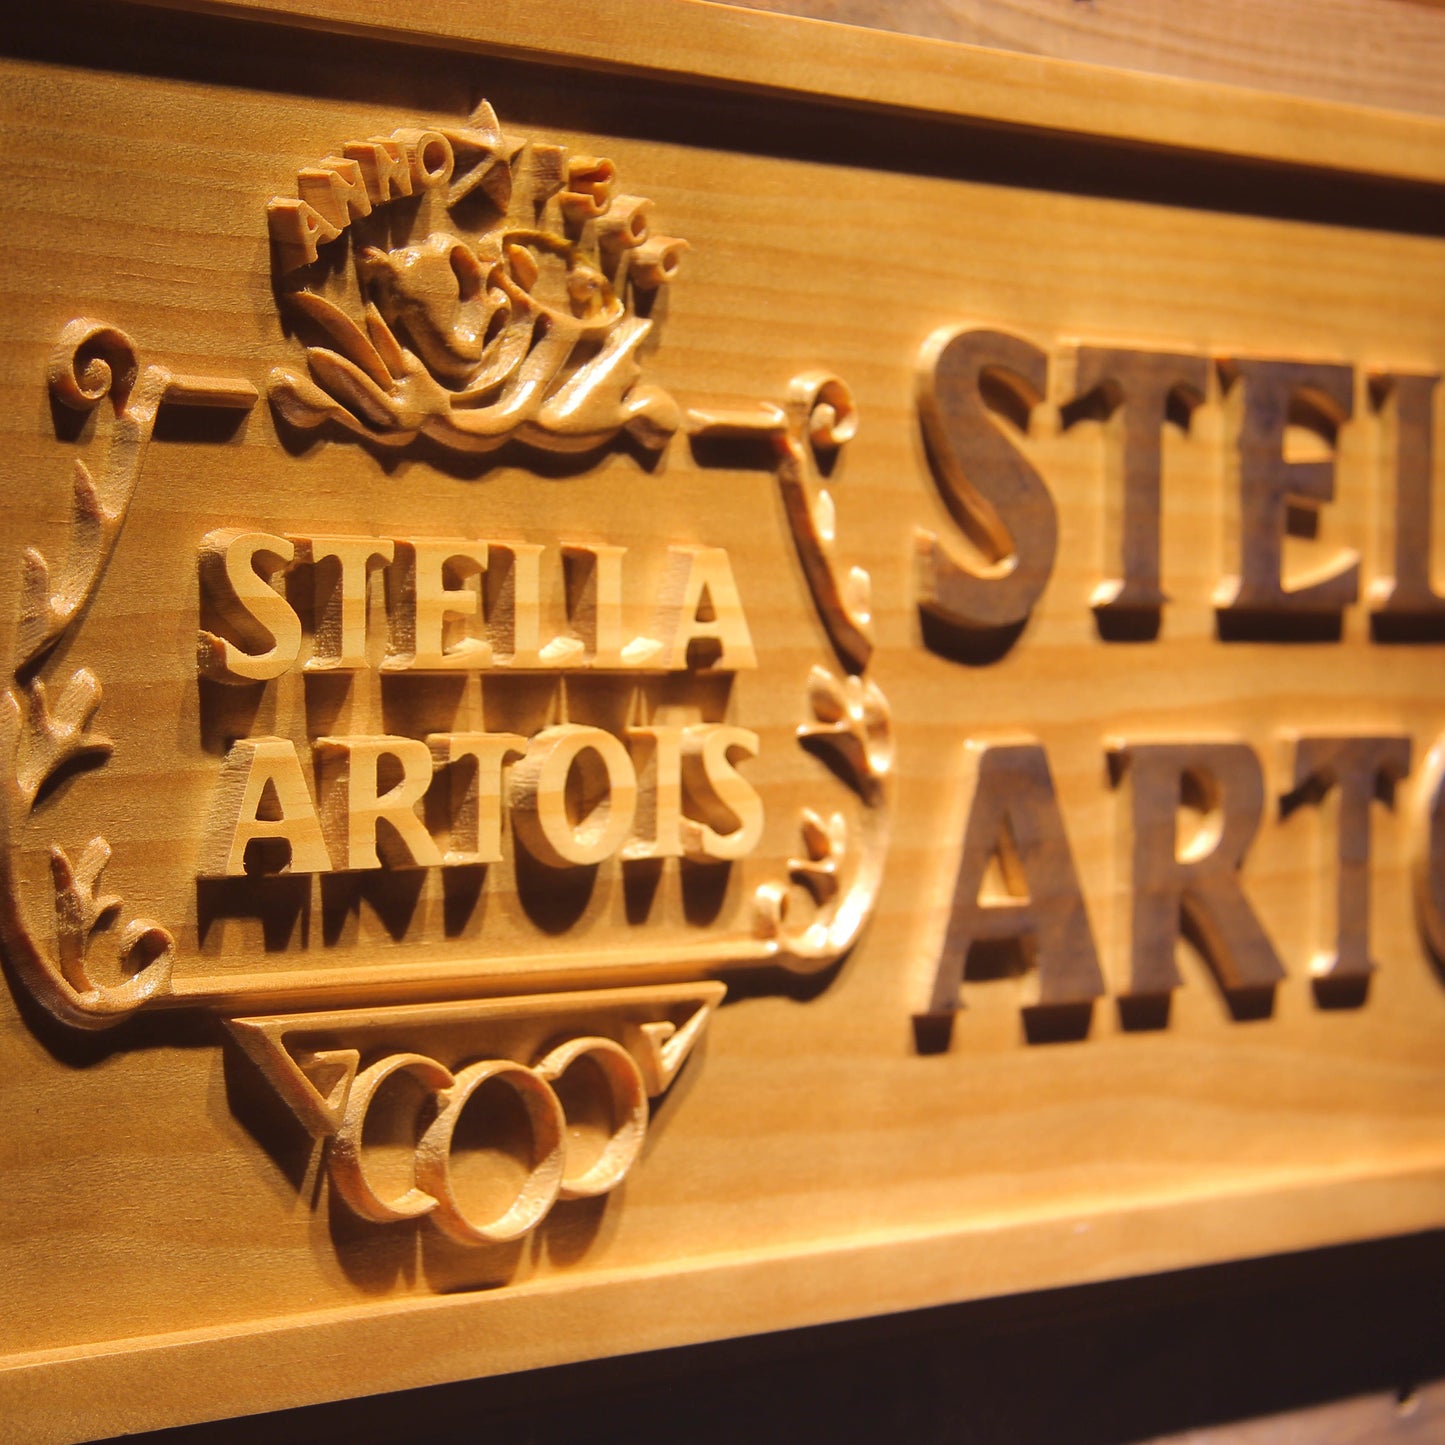 Stella Artois  3D Wooden Signs by Woody Signs Co. - Handmade Crafted Unique Wooden Creative